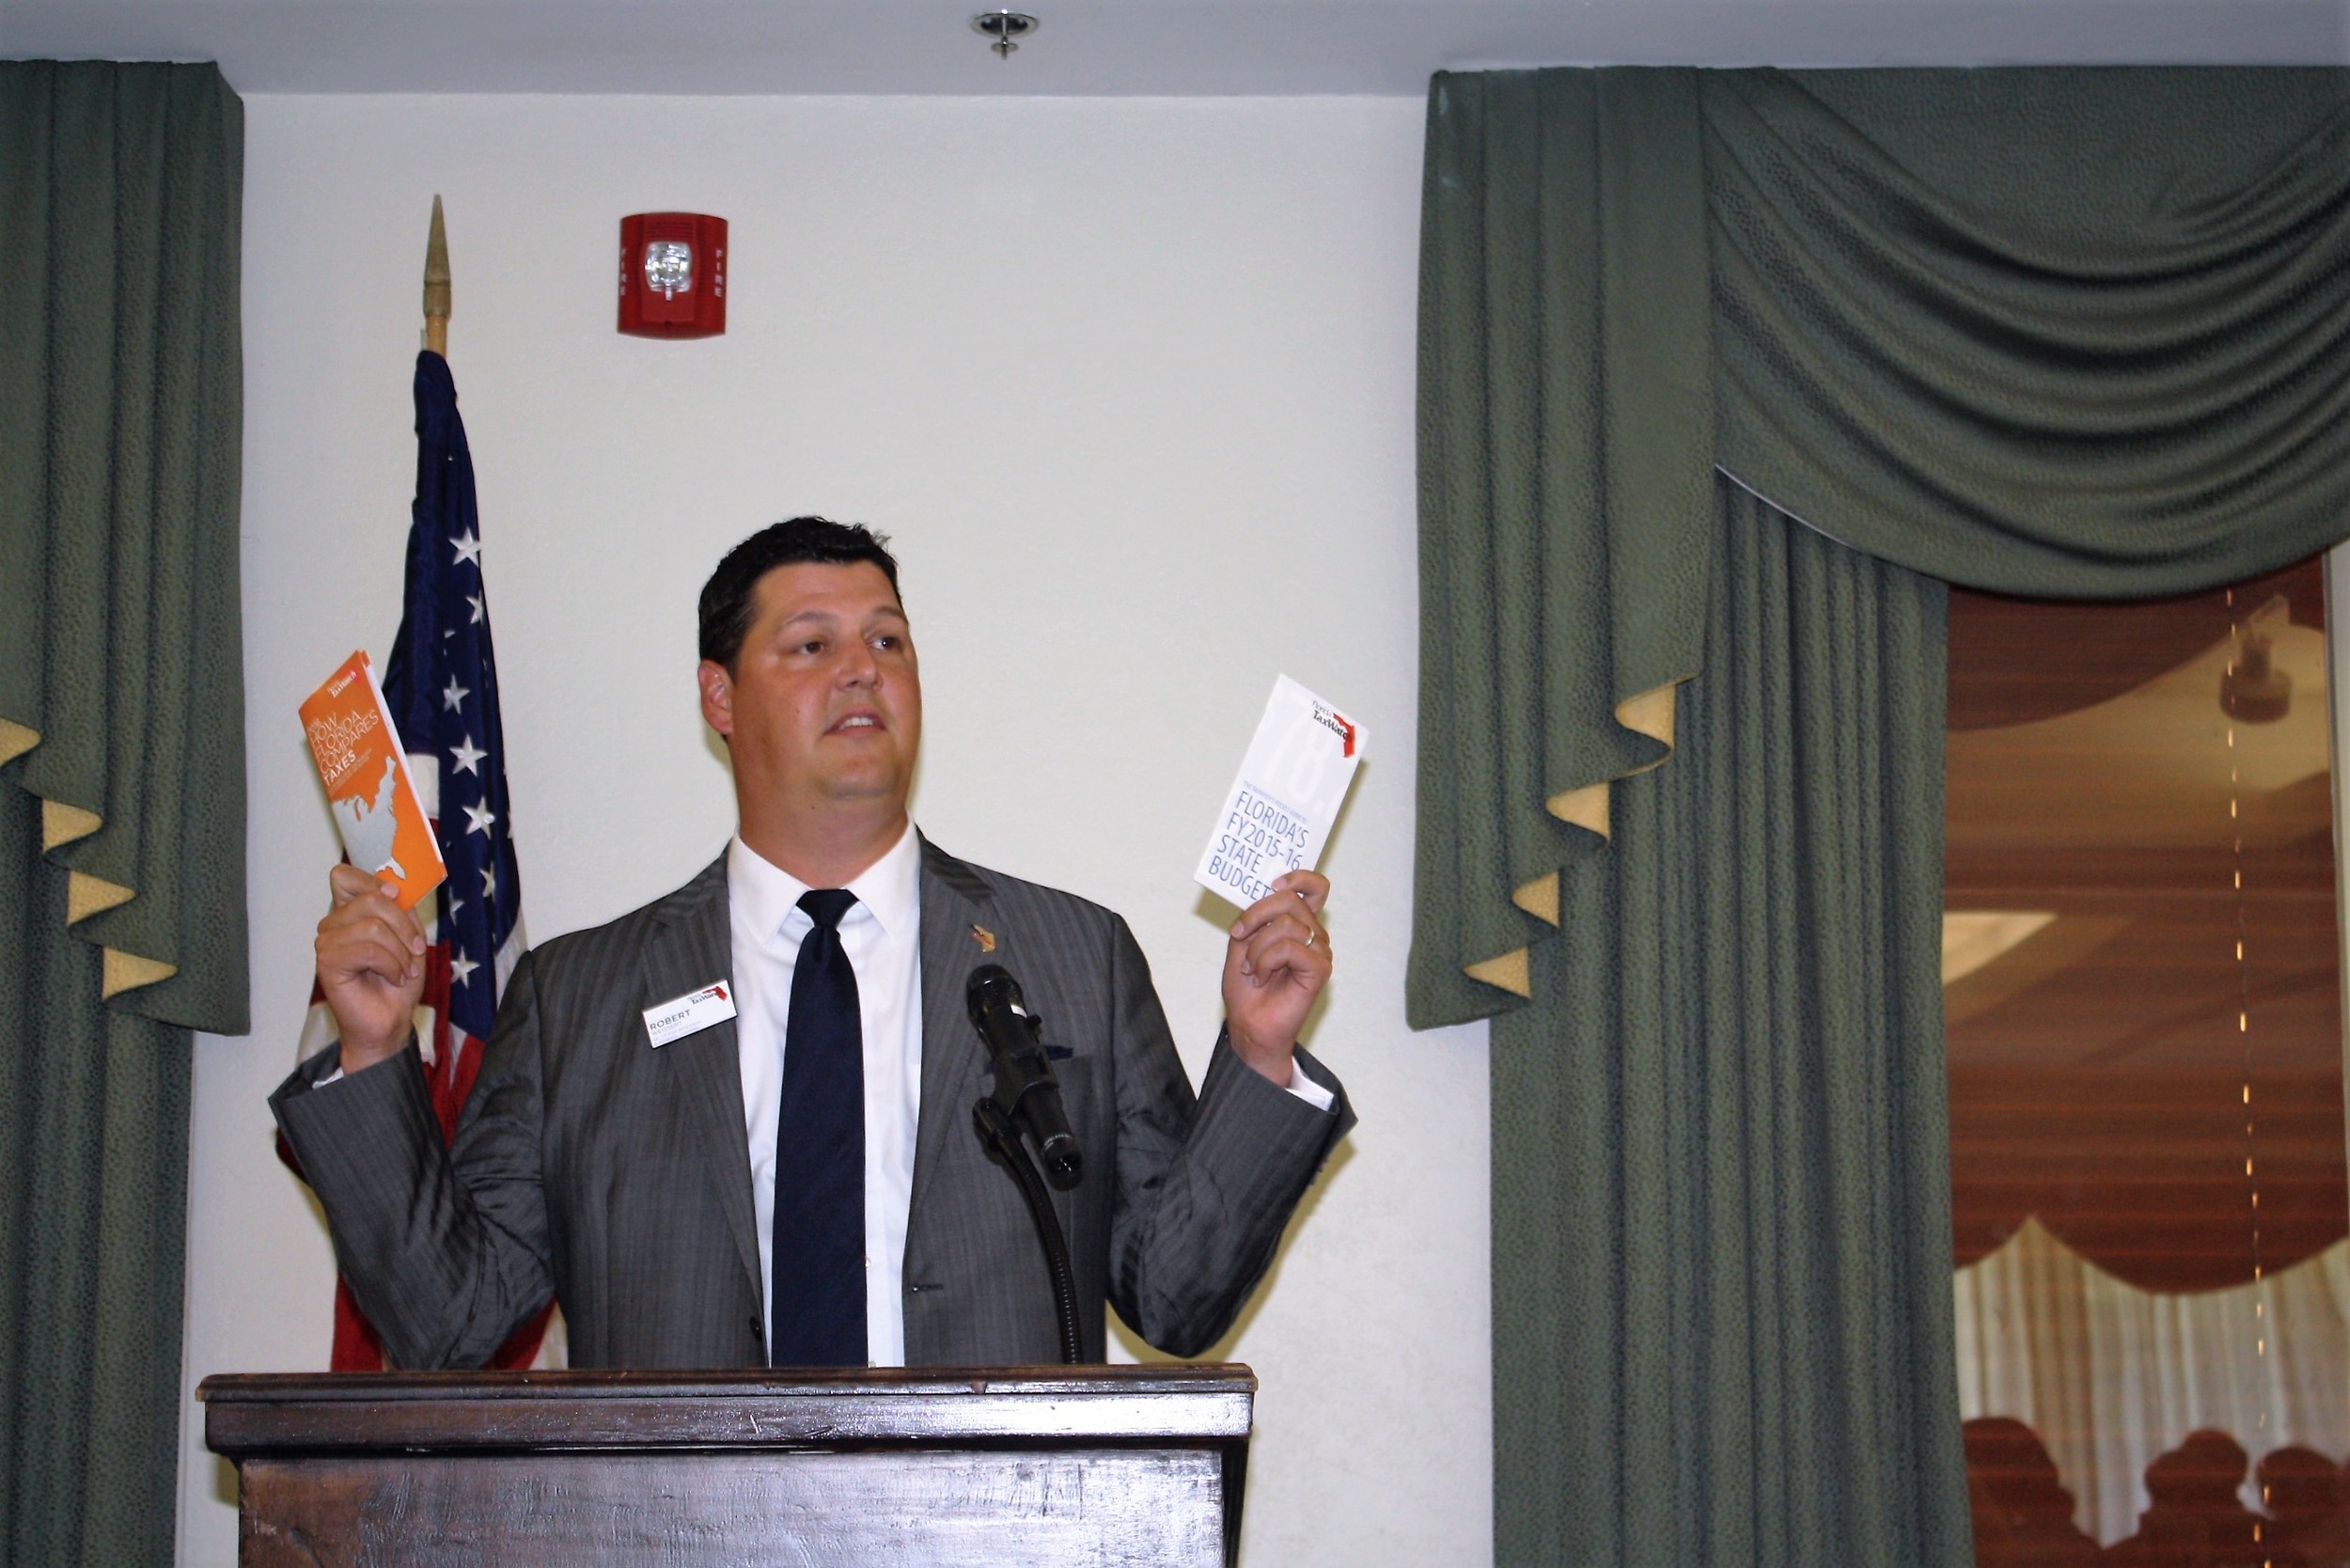 Robert Weissert of Florida TaxWatch addresses the June meeting of the Ponte Vedra Republican Club.